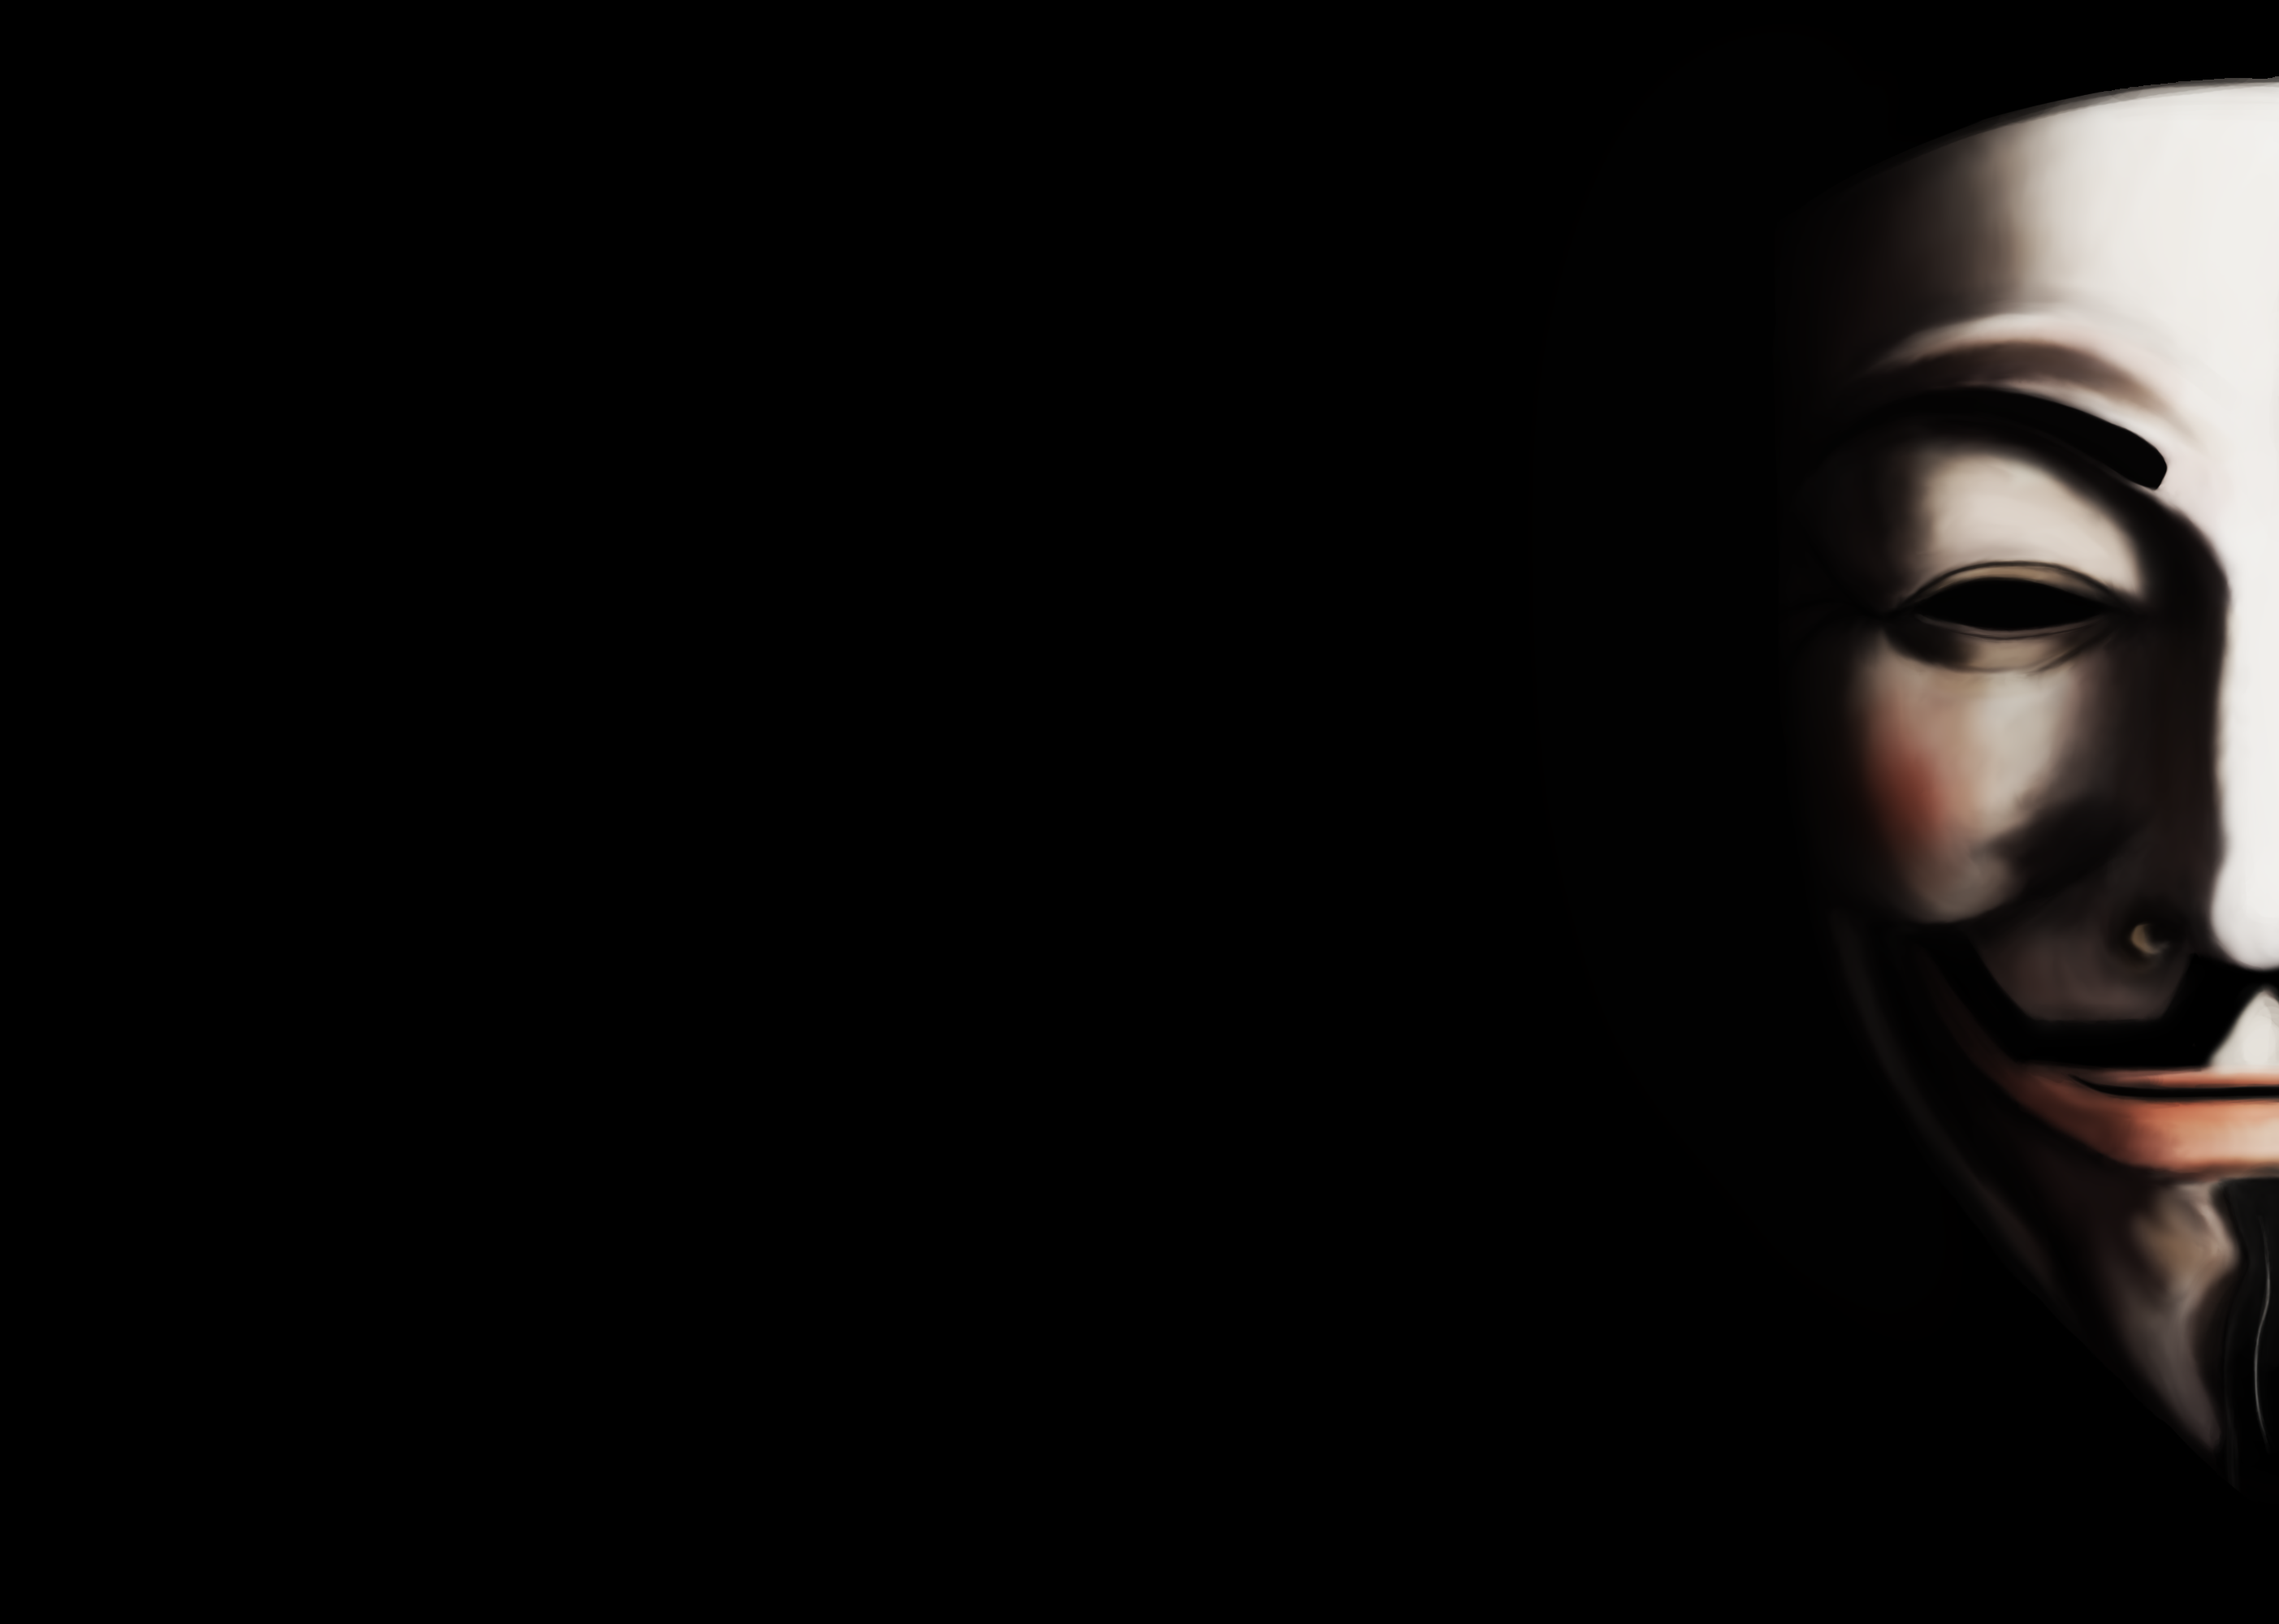 V for Vendetta Wallpapers Images Photos Pictures Backgrounds